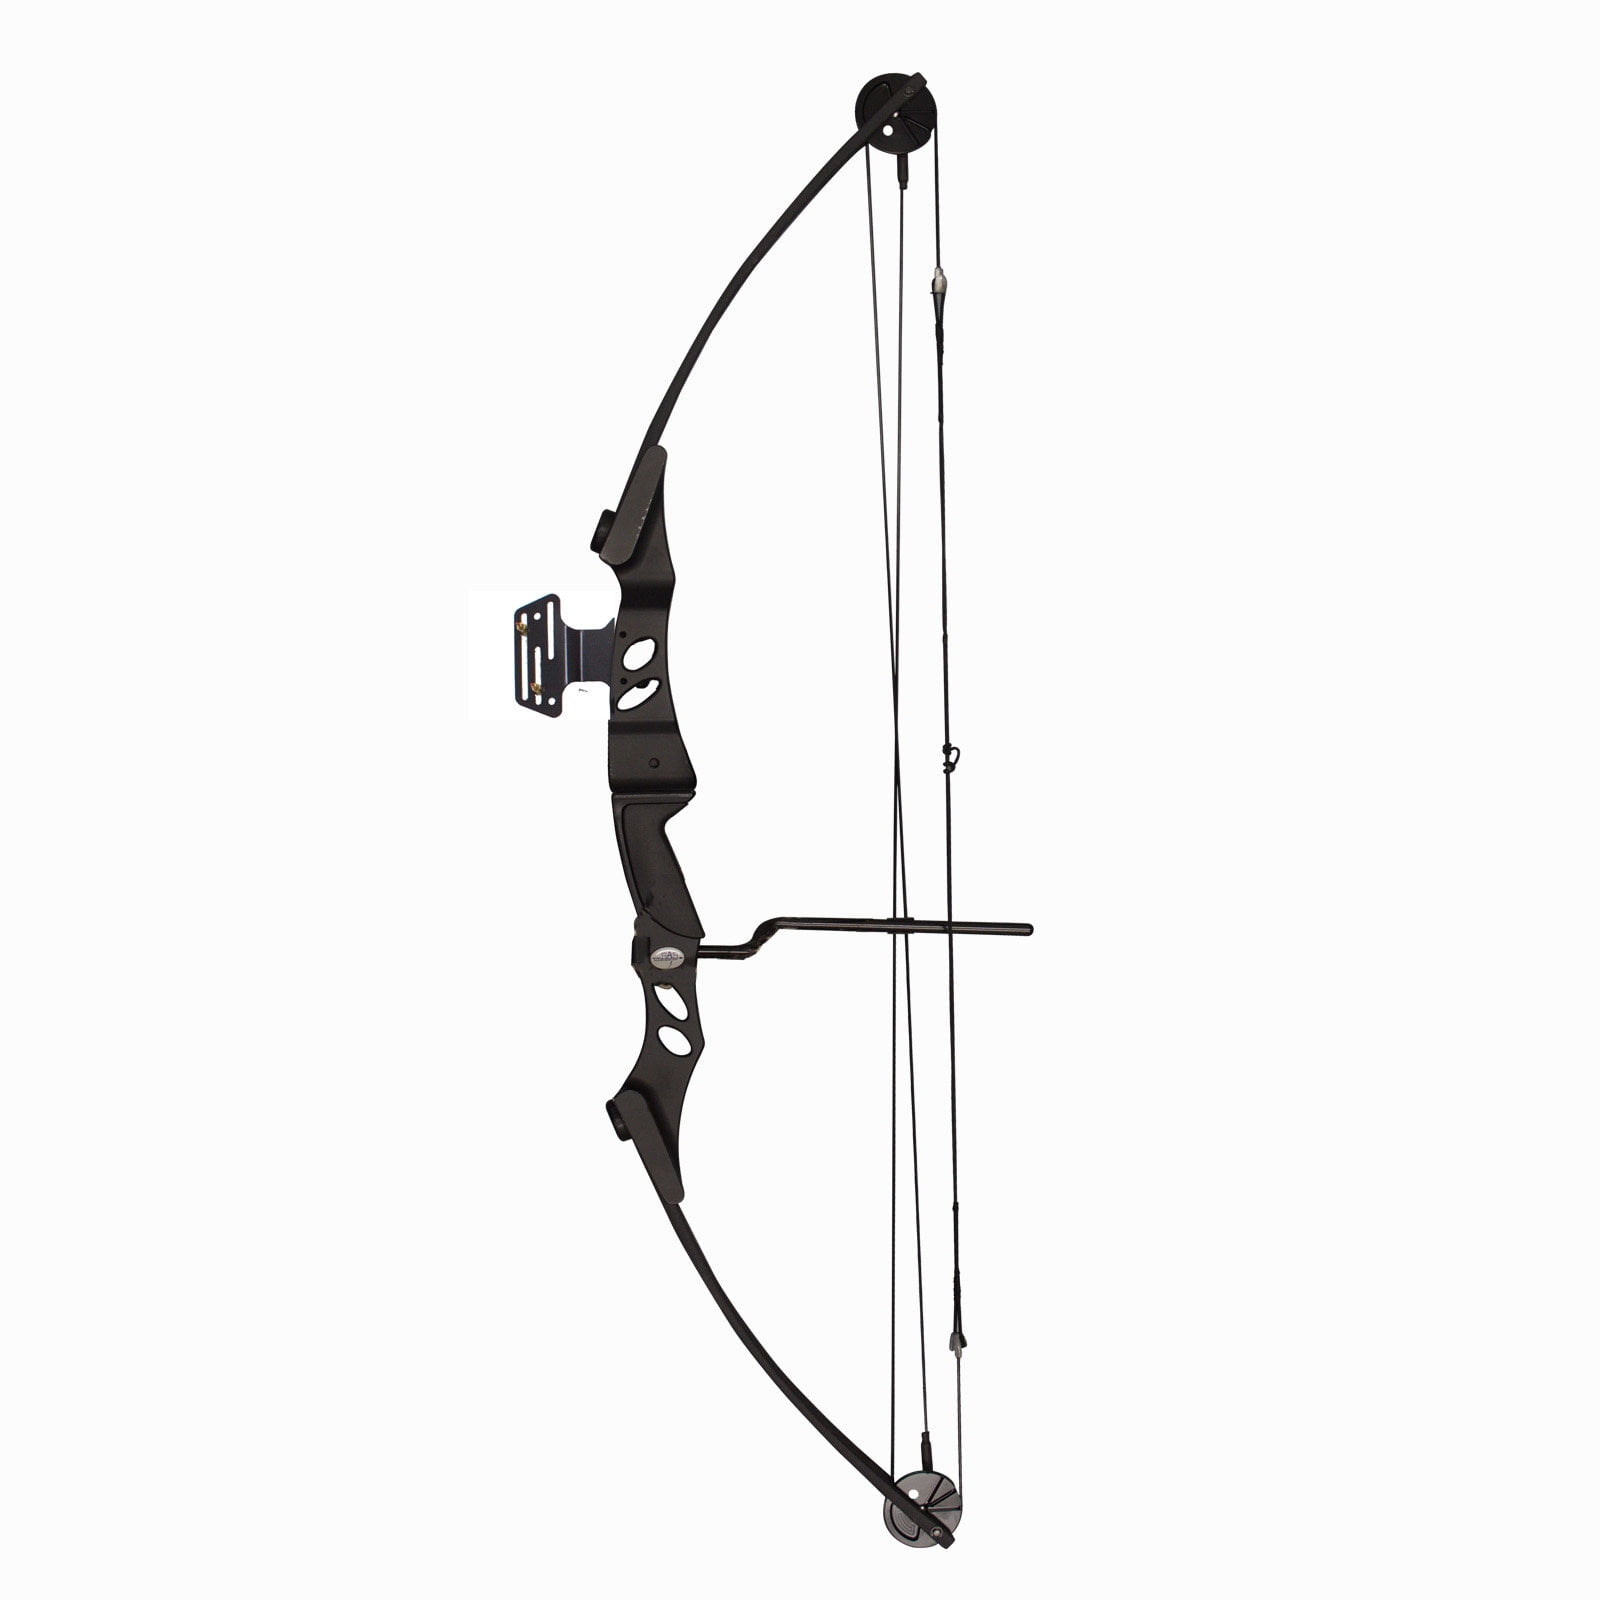 Details about   Pro 5 Spot Arrow Quick Release Quiver Holder Adjustable Compound Bow Hunting New 